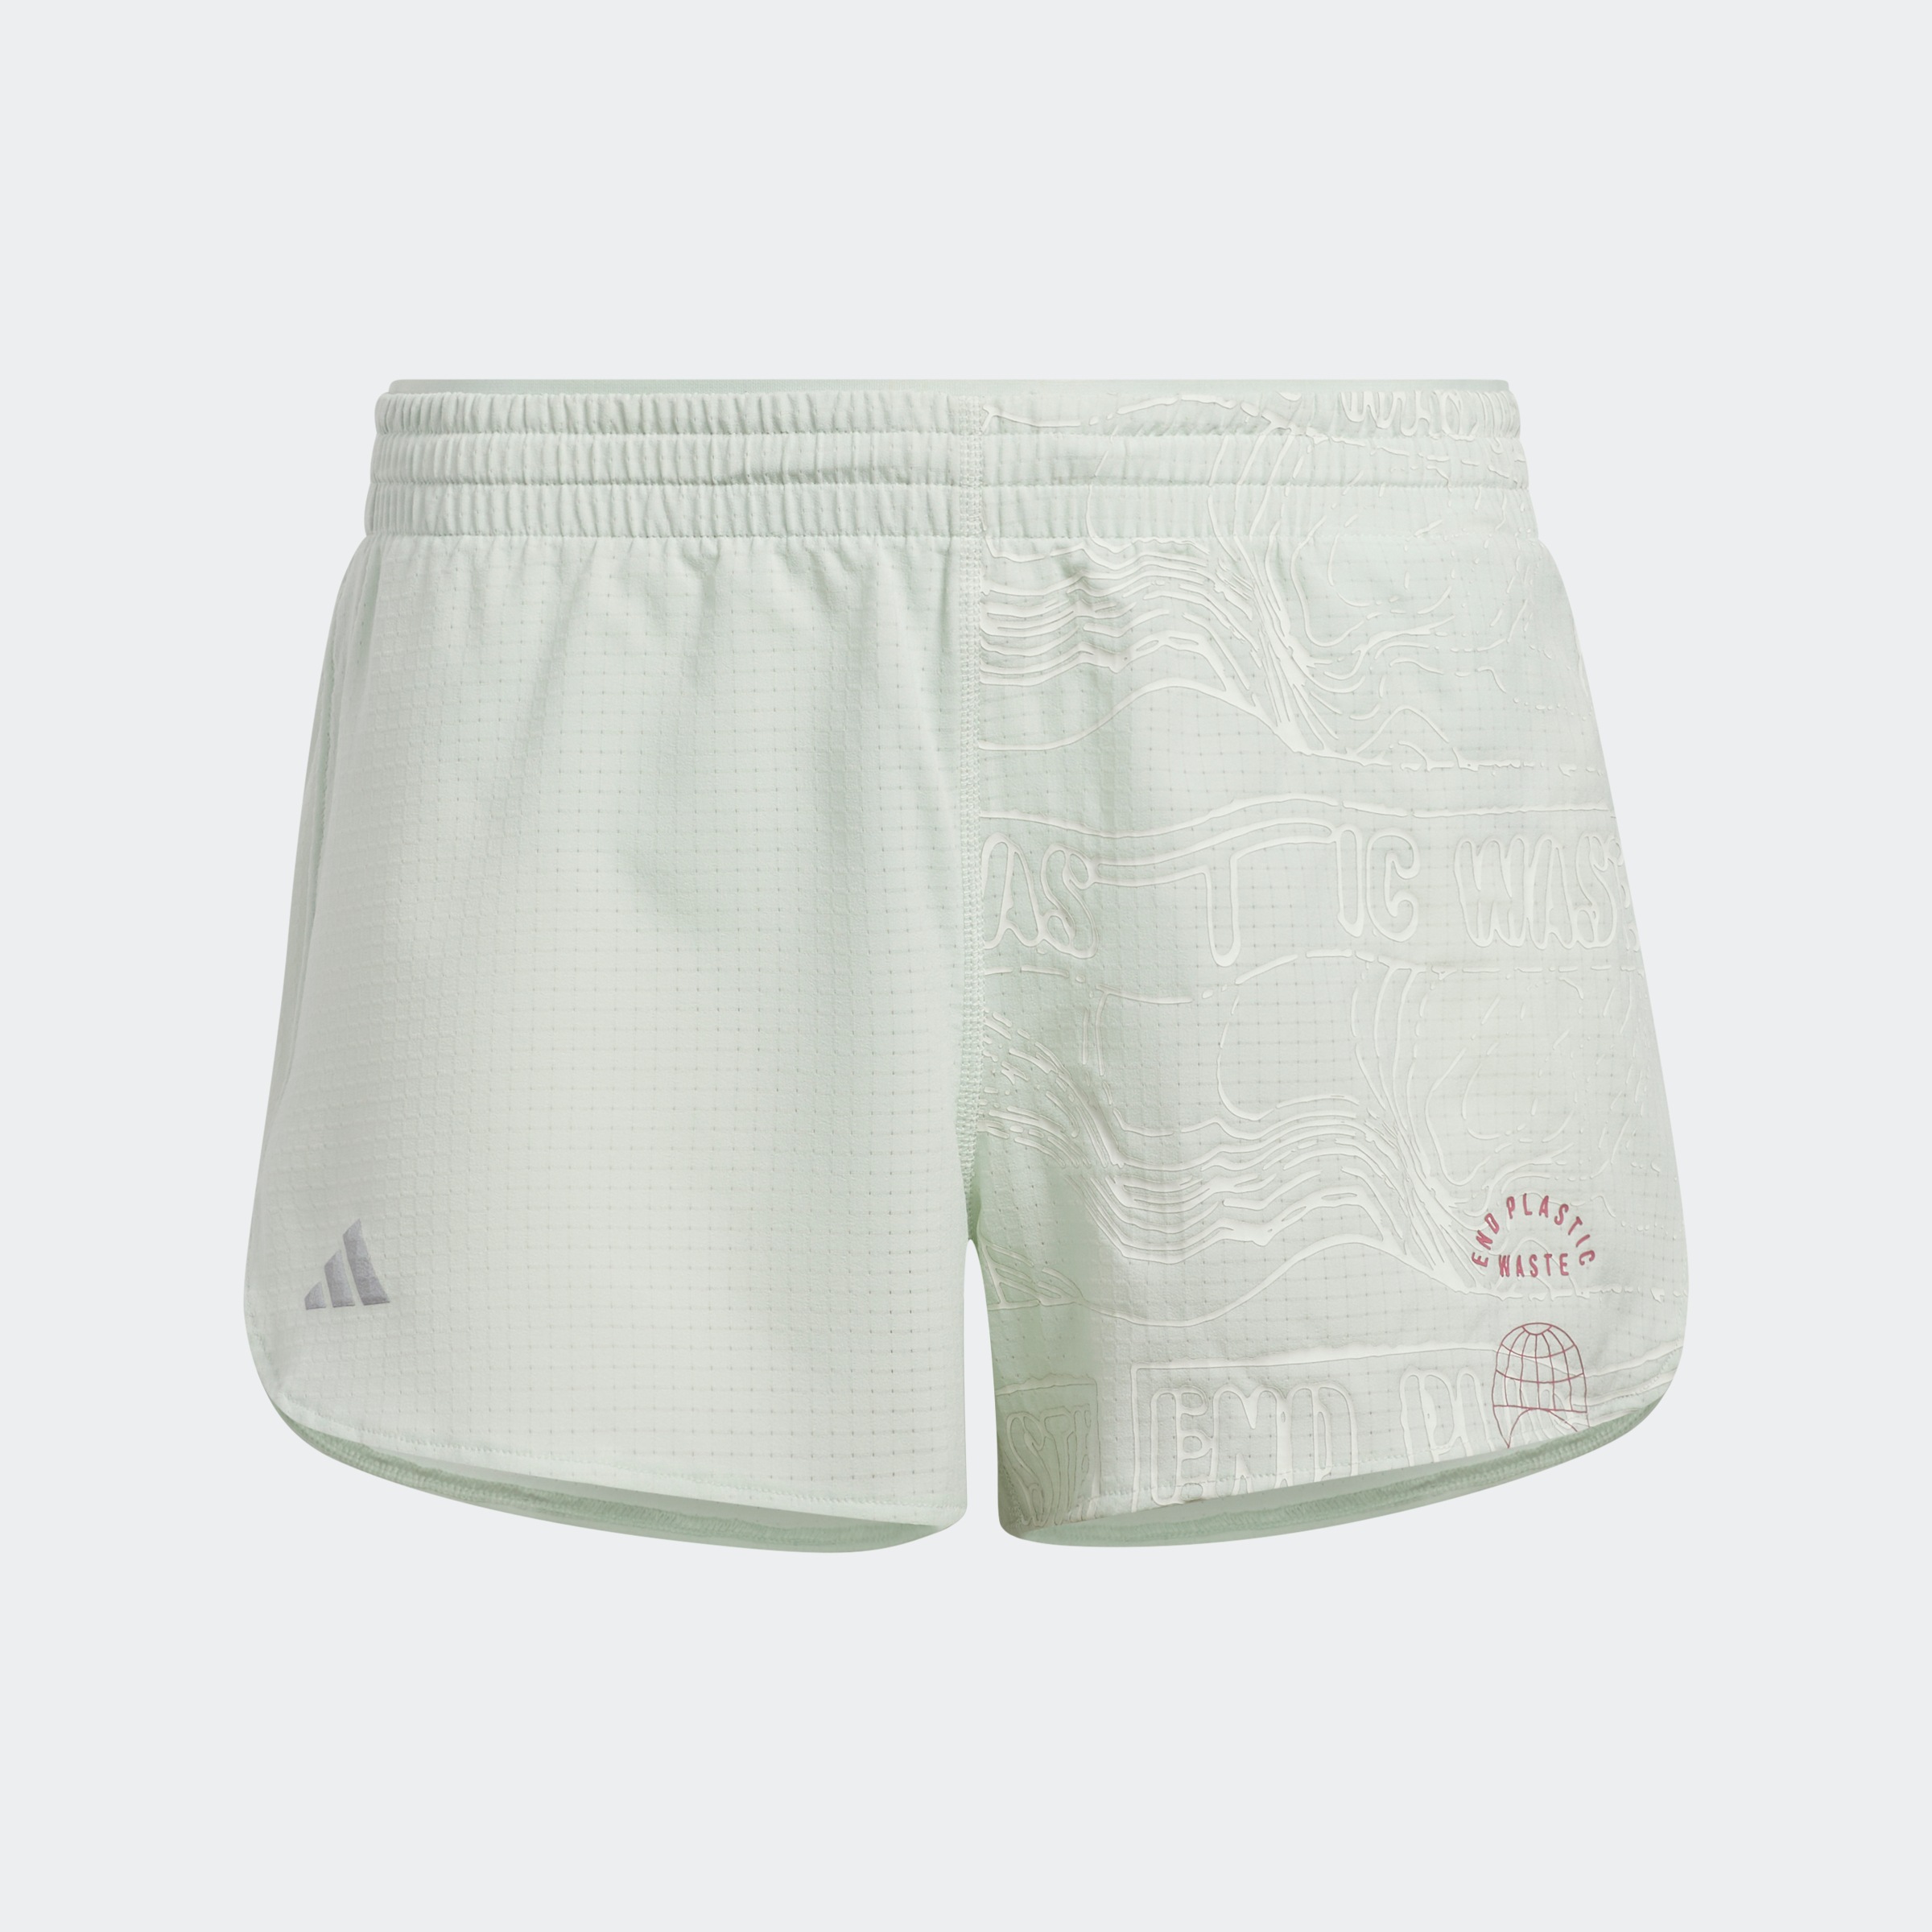 SHORTS«, FOR OCEANS Laufshorts bei »RUN ♕ THE Performance adidas tlg.) (1